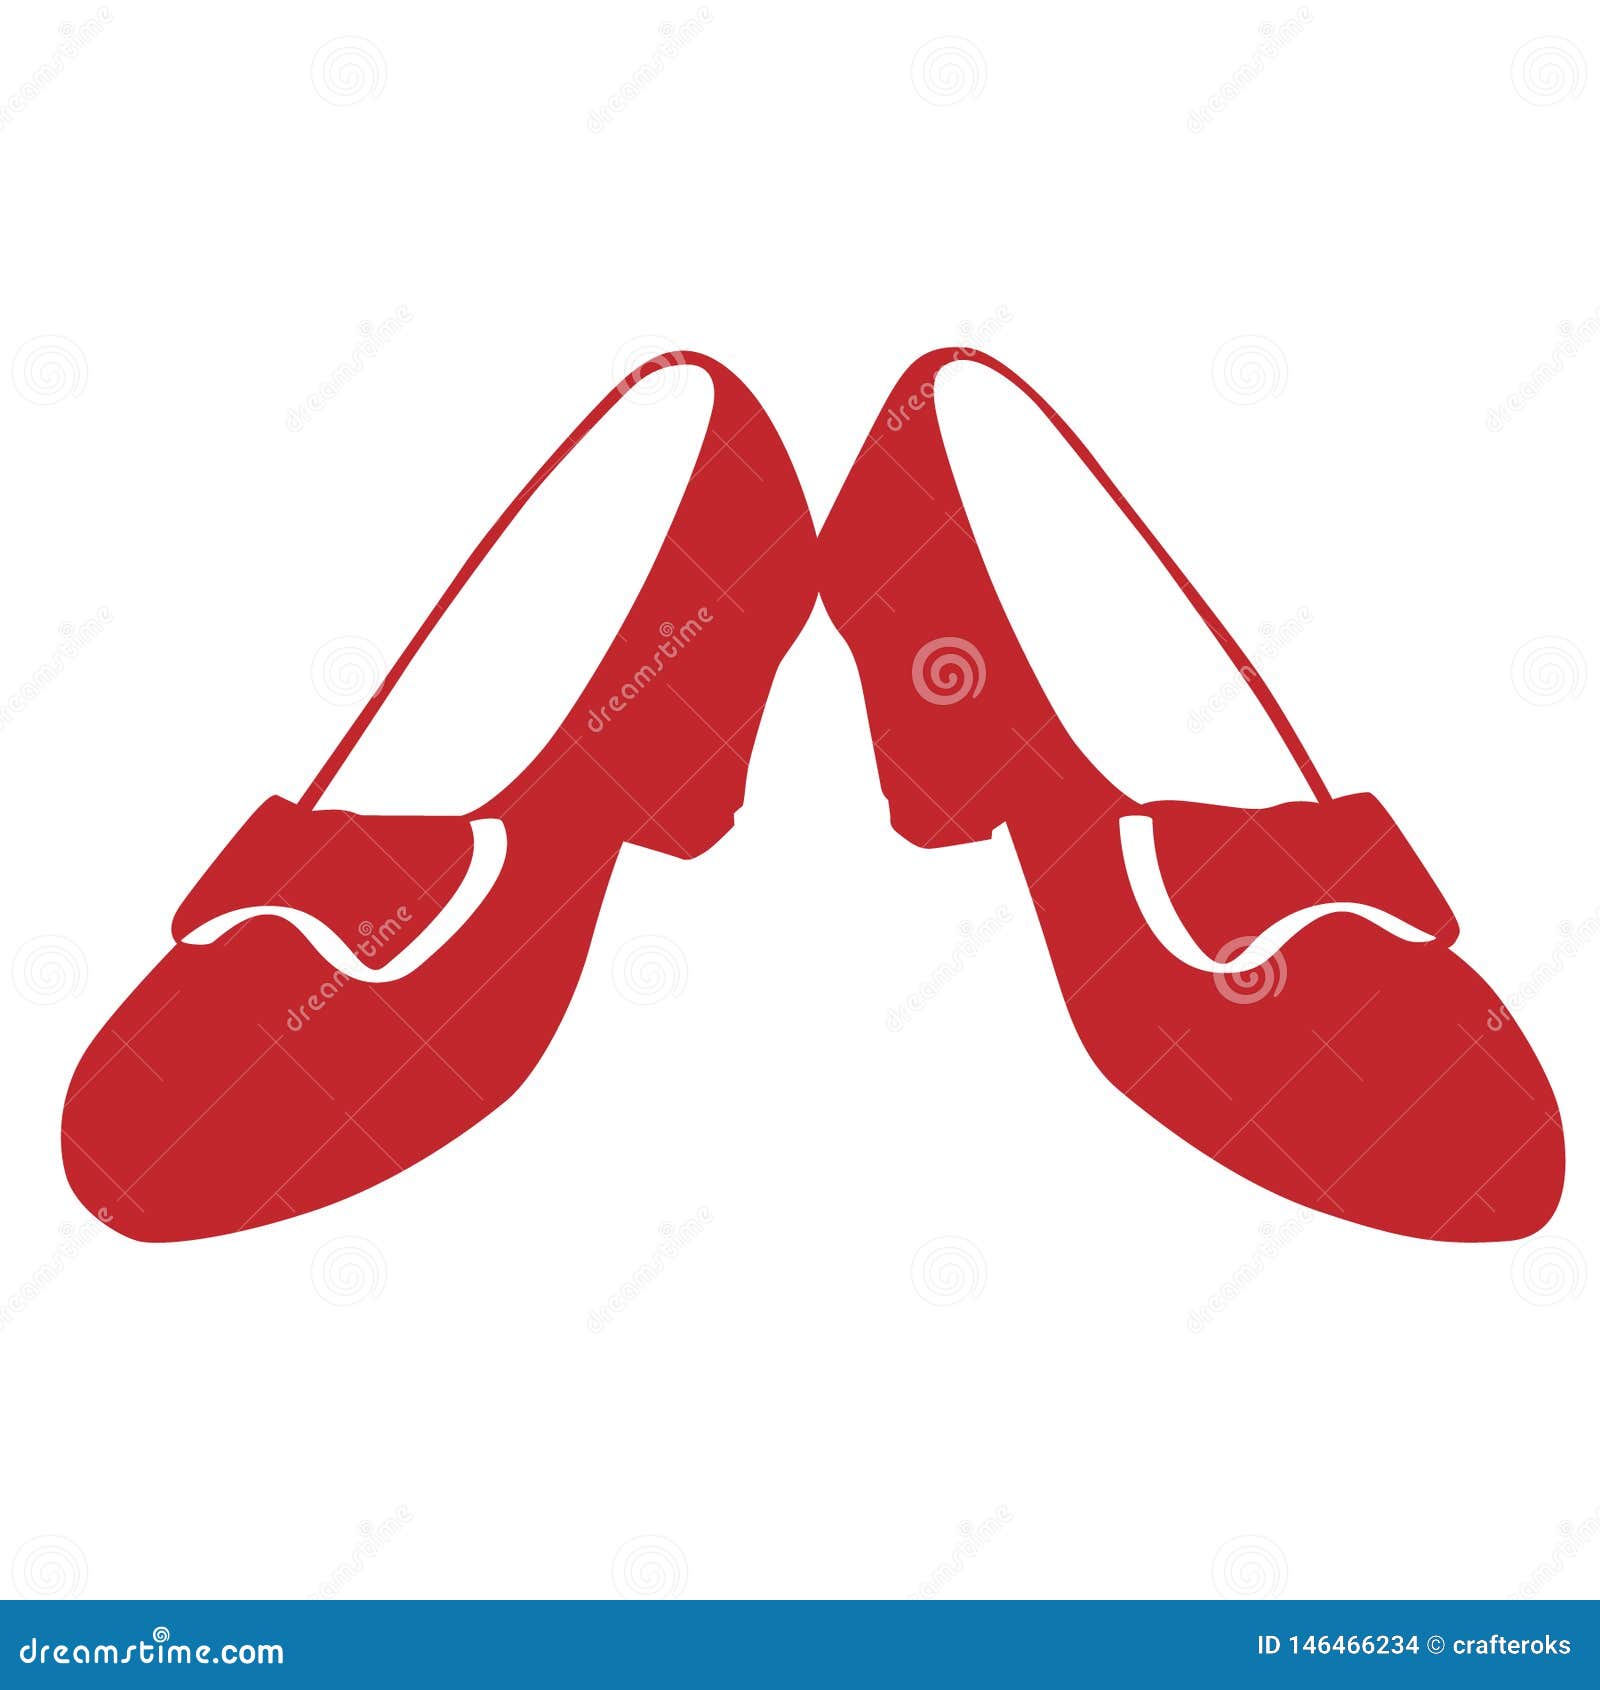 ruby red slippers hand drawn, , eps, logo, icon, crafteroks, silhouette  for different uses